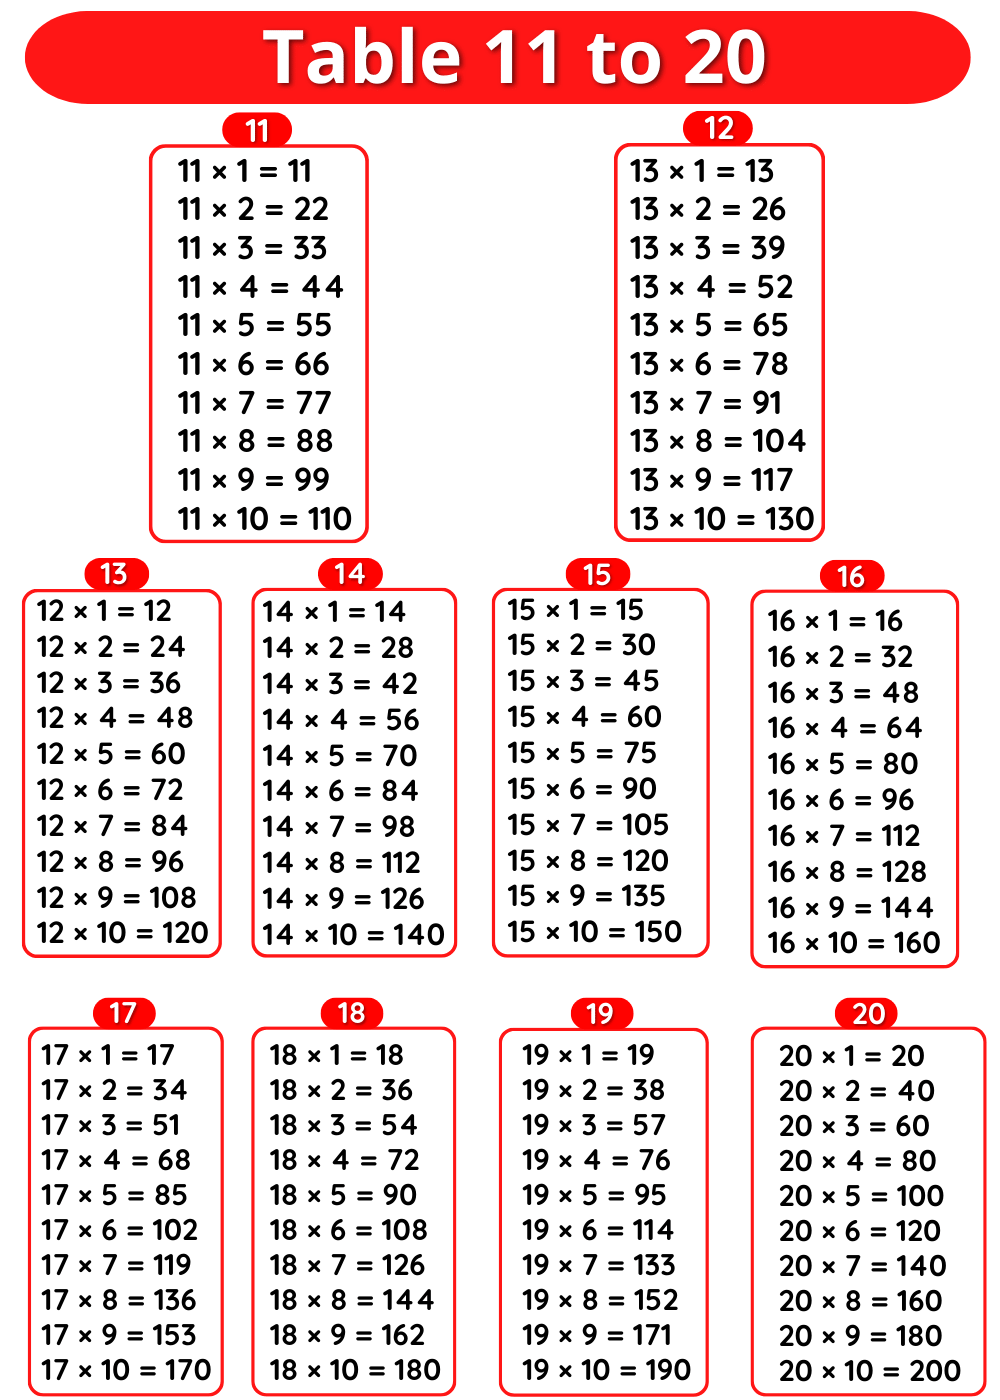 Tables 11 to 20 – Multiplication Tables 11 to 20